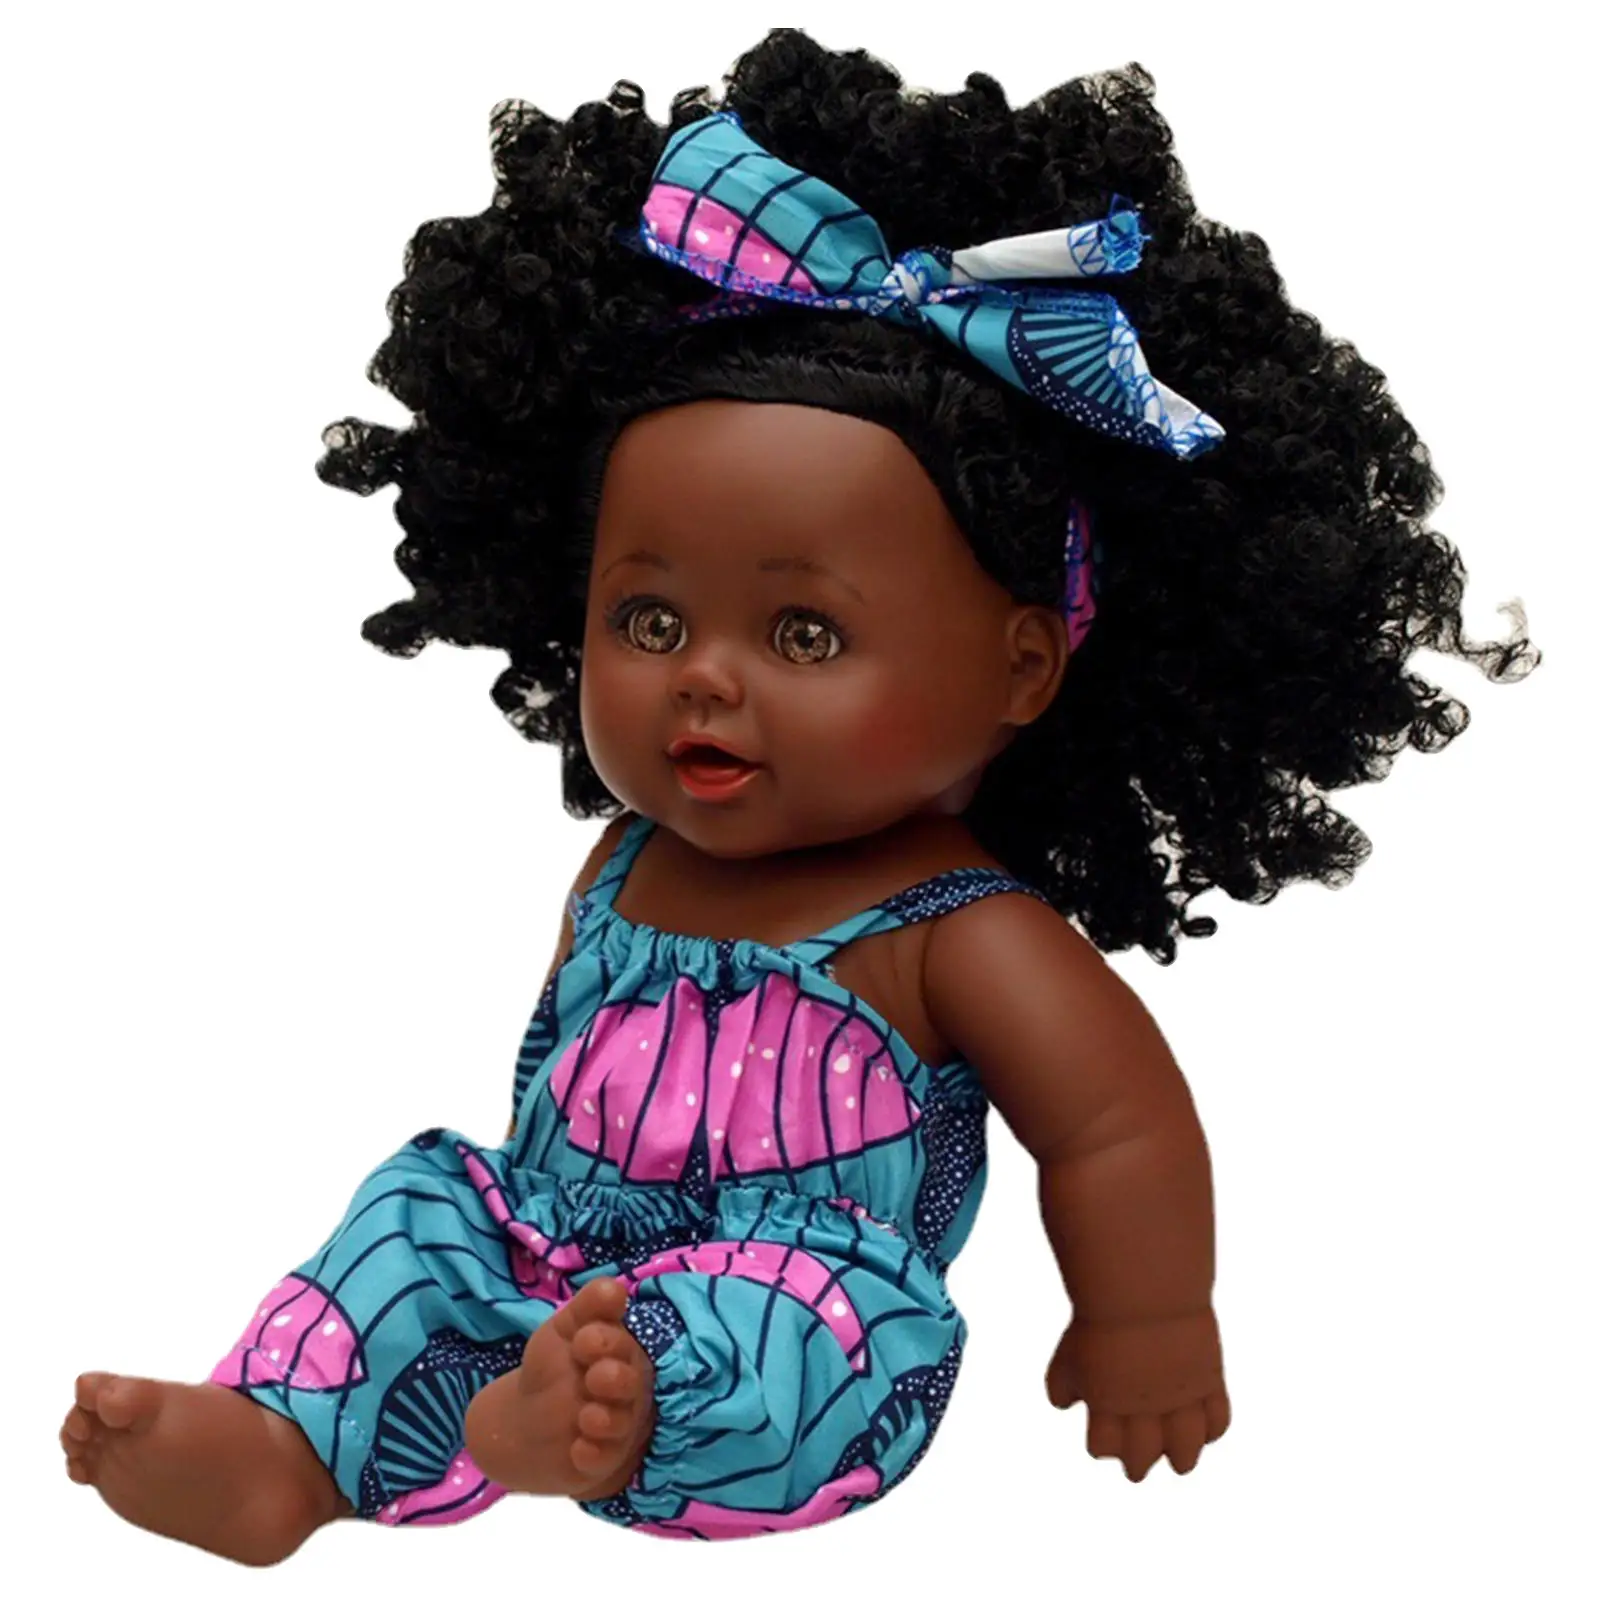 Cute Baby Doll 30cm Black Skin DIY with Clothes Curly Hair Realistic African Baby Doll Black Girl Doll for Toddler Infants Kids